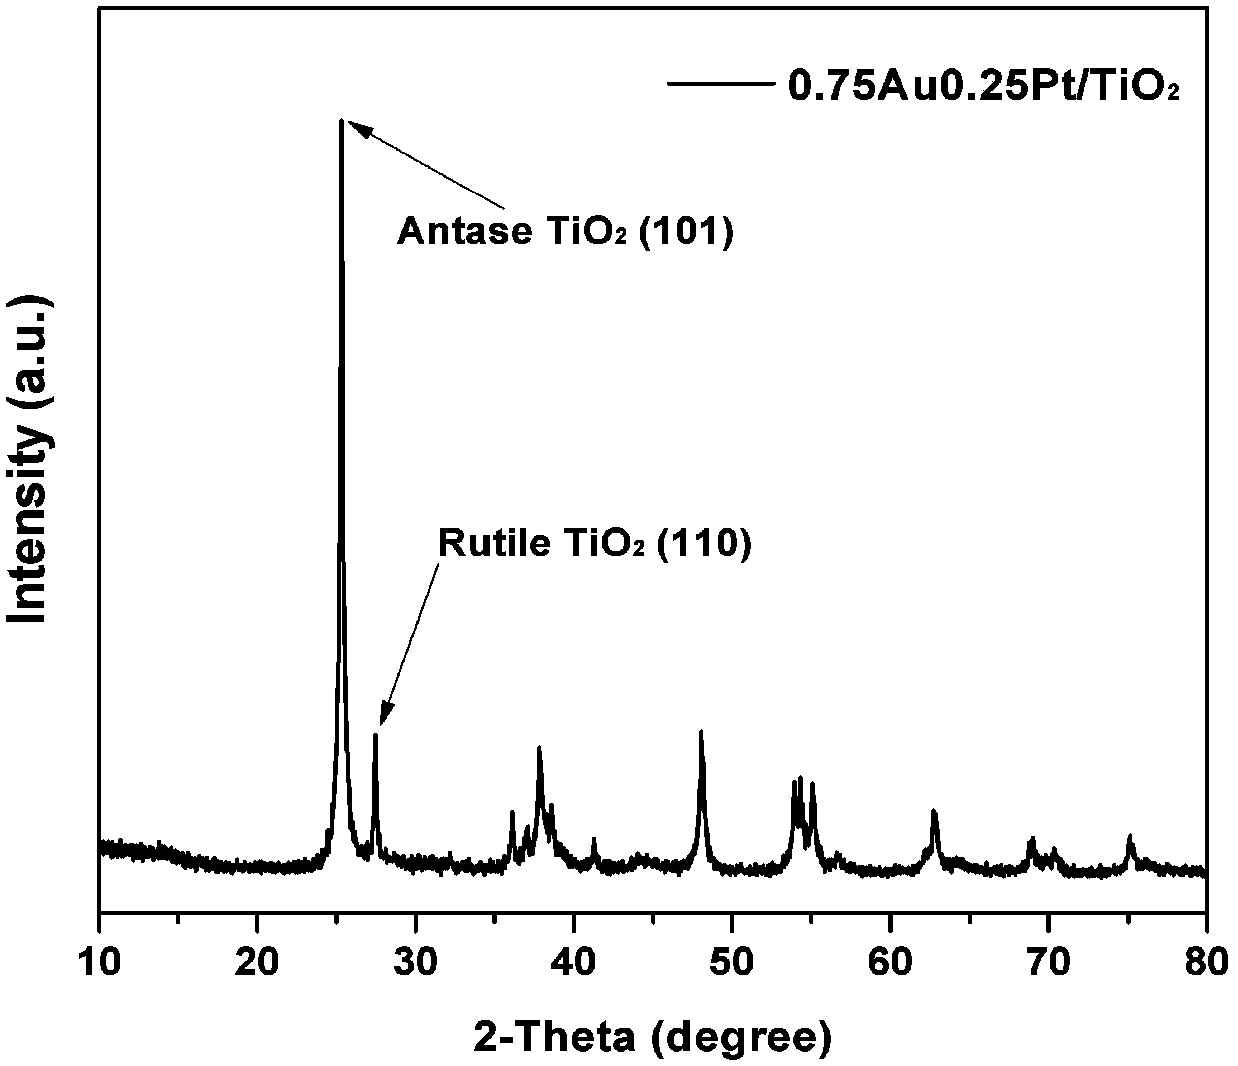 Preparation method and application of titanium dioxide nanocomposite particles loaded with pt-au alloy